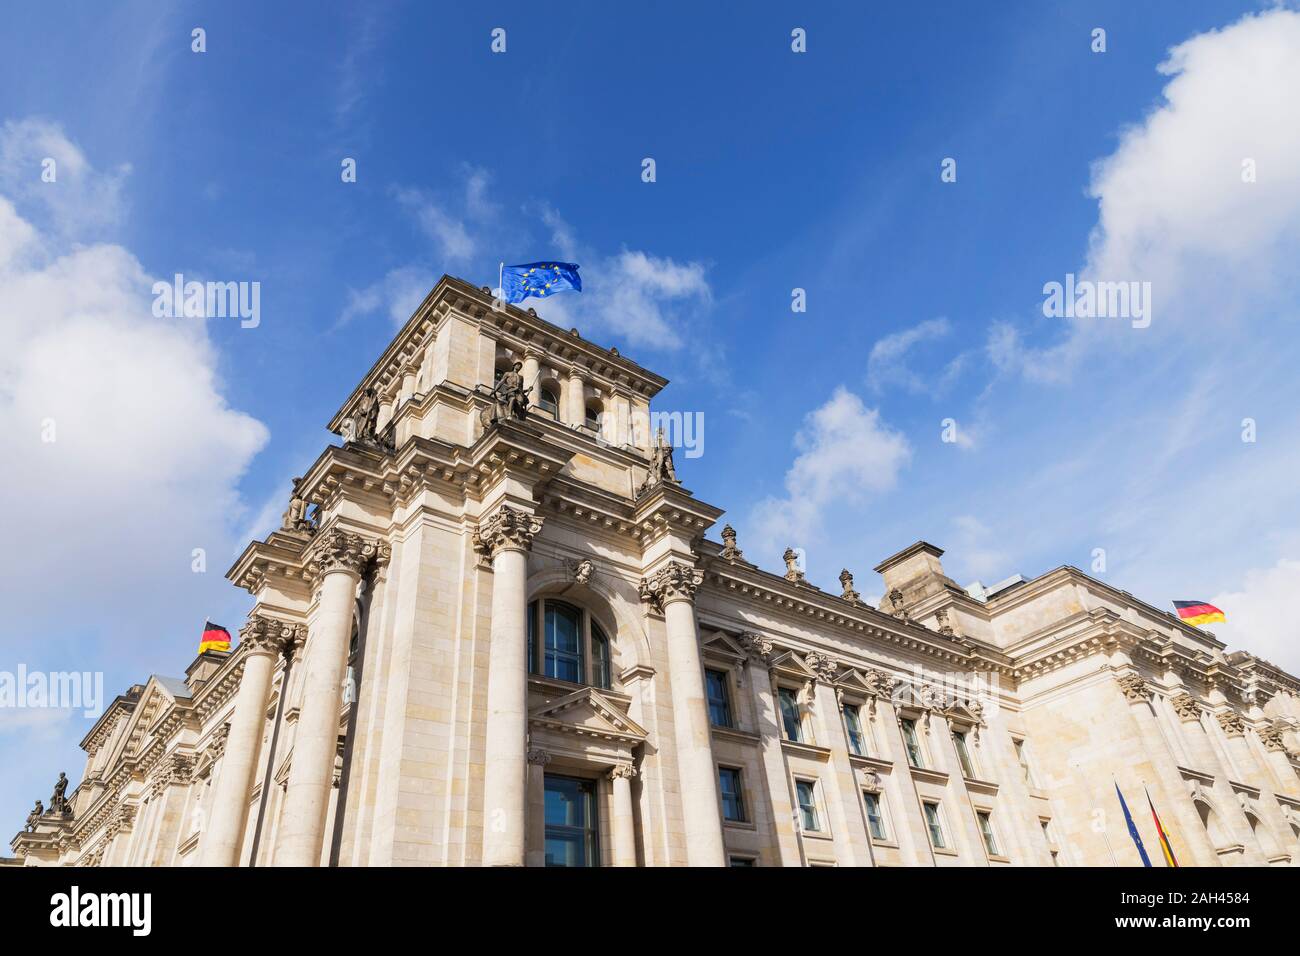 Germany, Berlin, Low angle view of Reichstag building Stock Photo